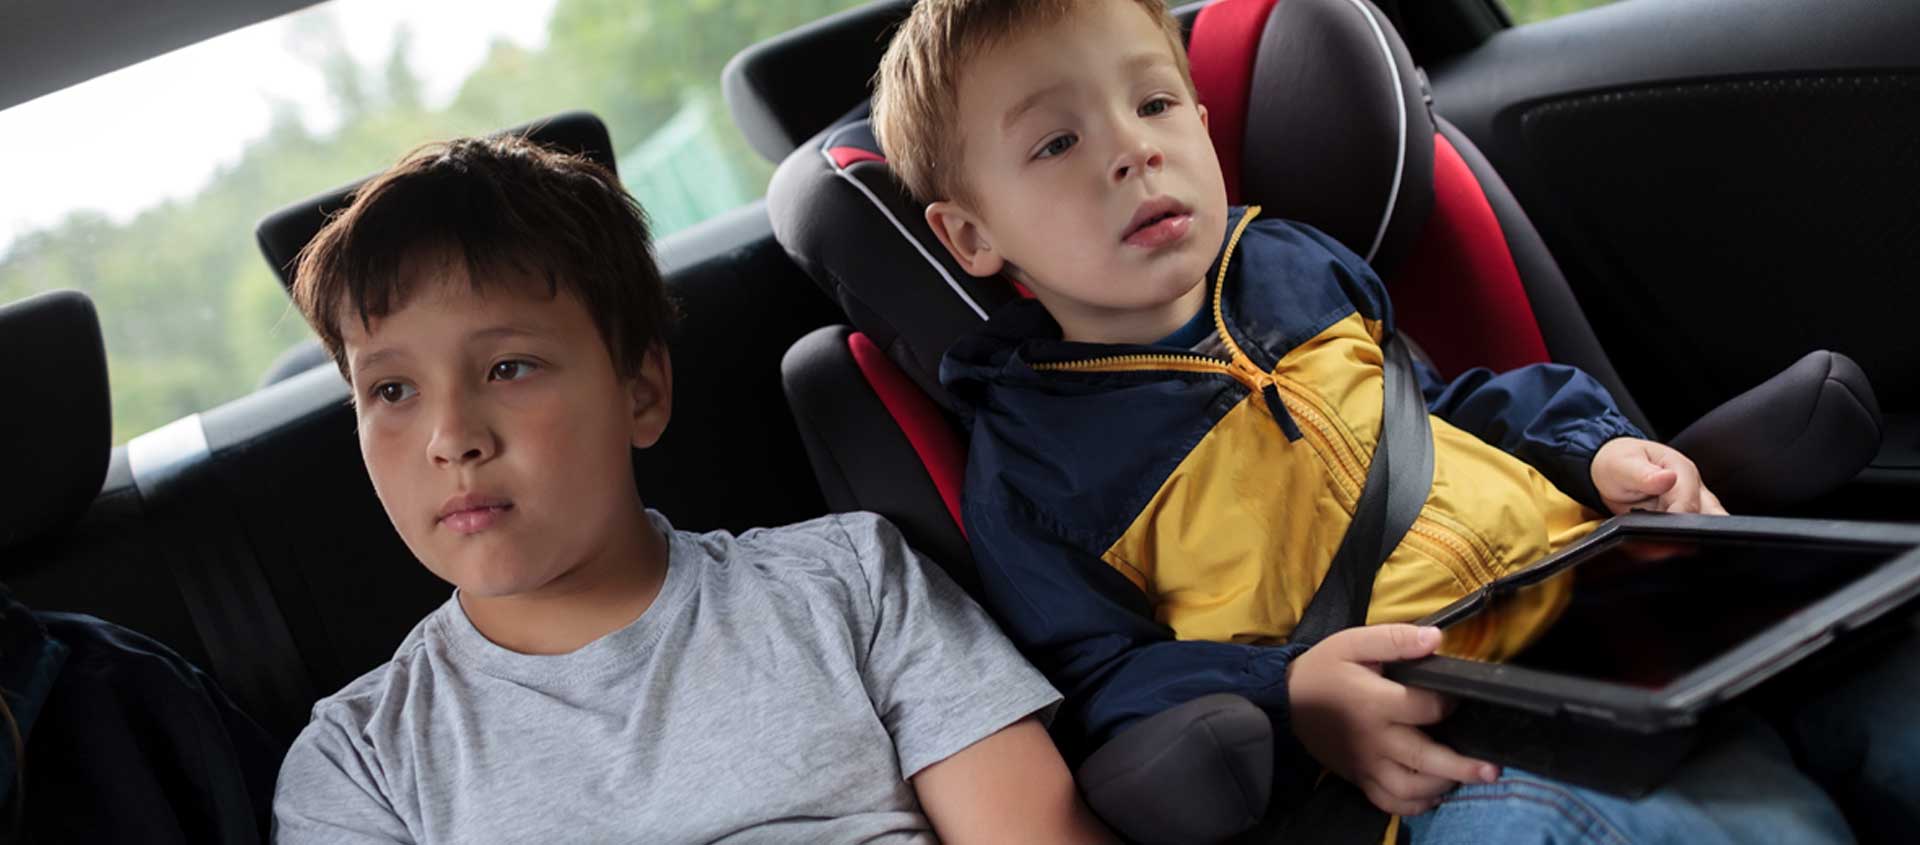 A school-age boy and his toddler brother sit in the back seat of the car.